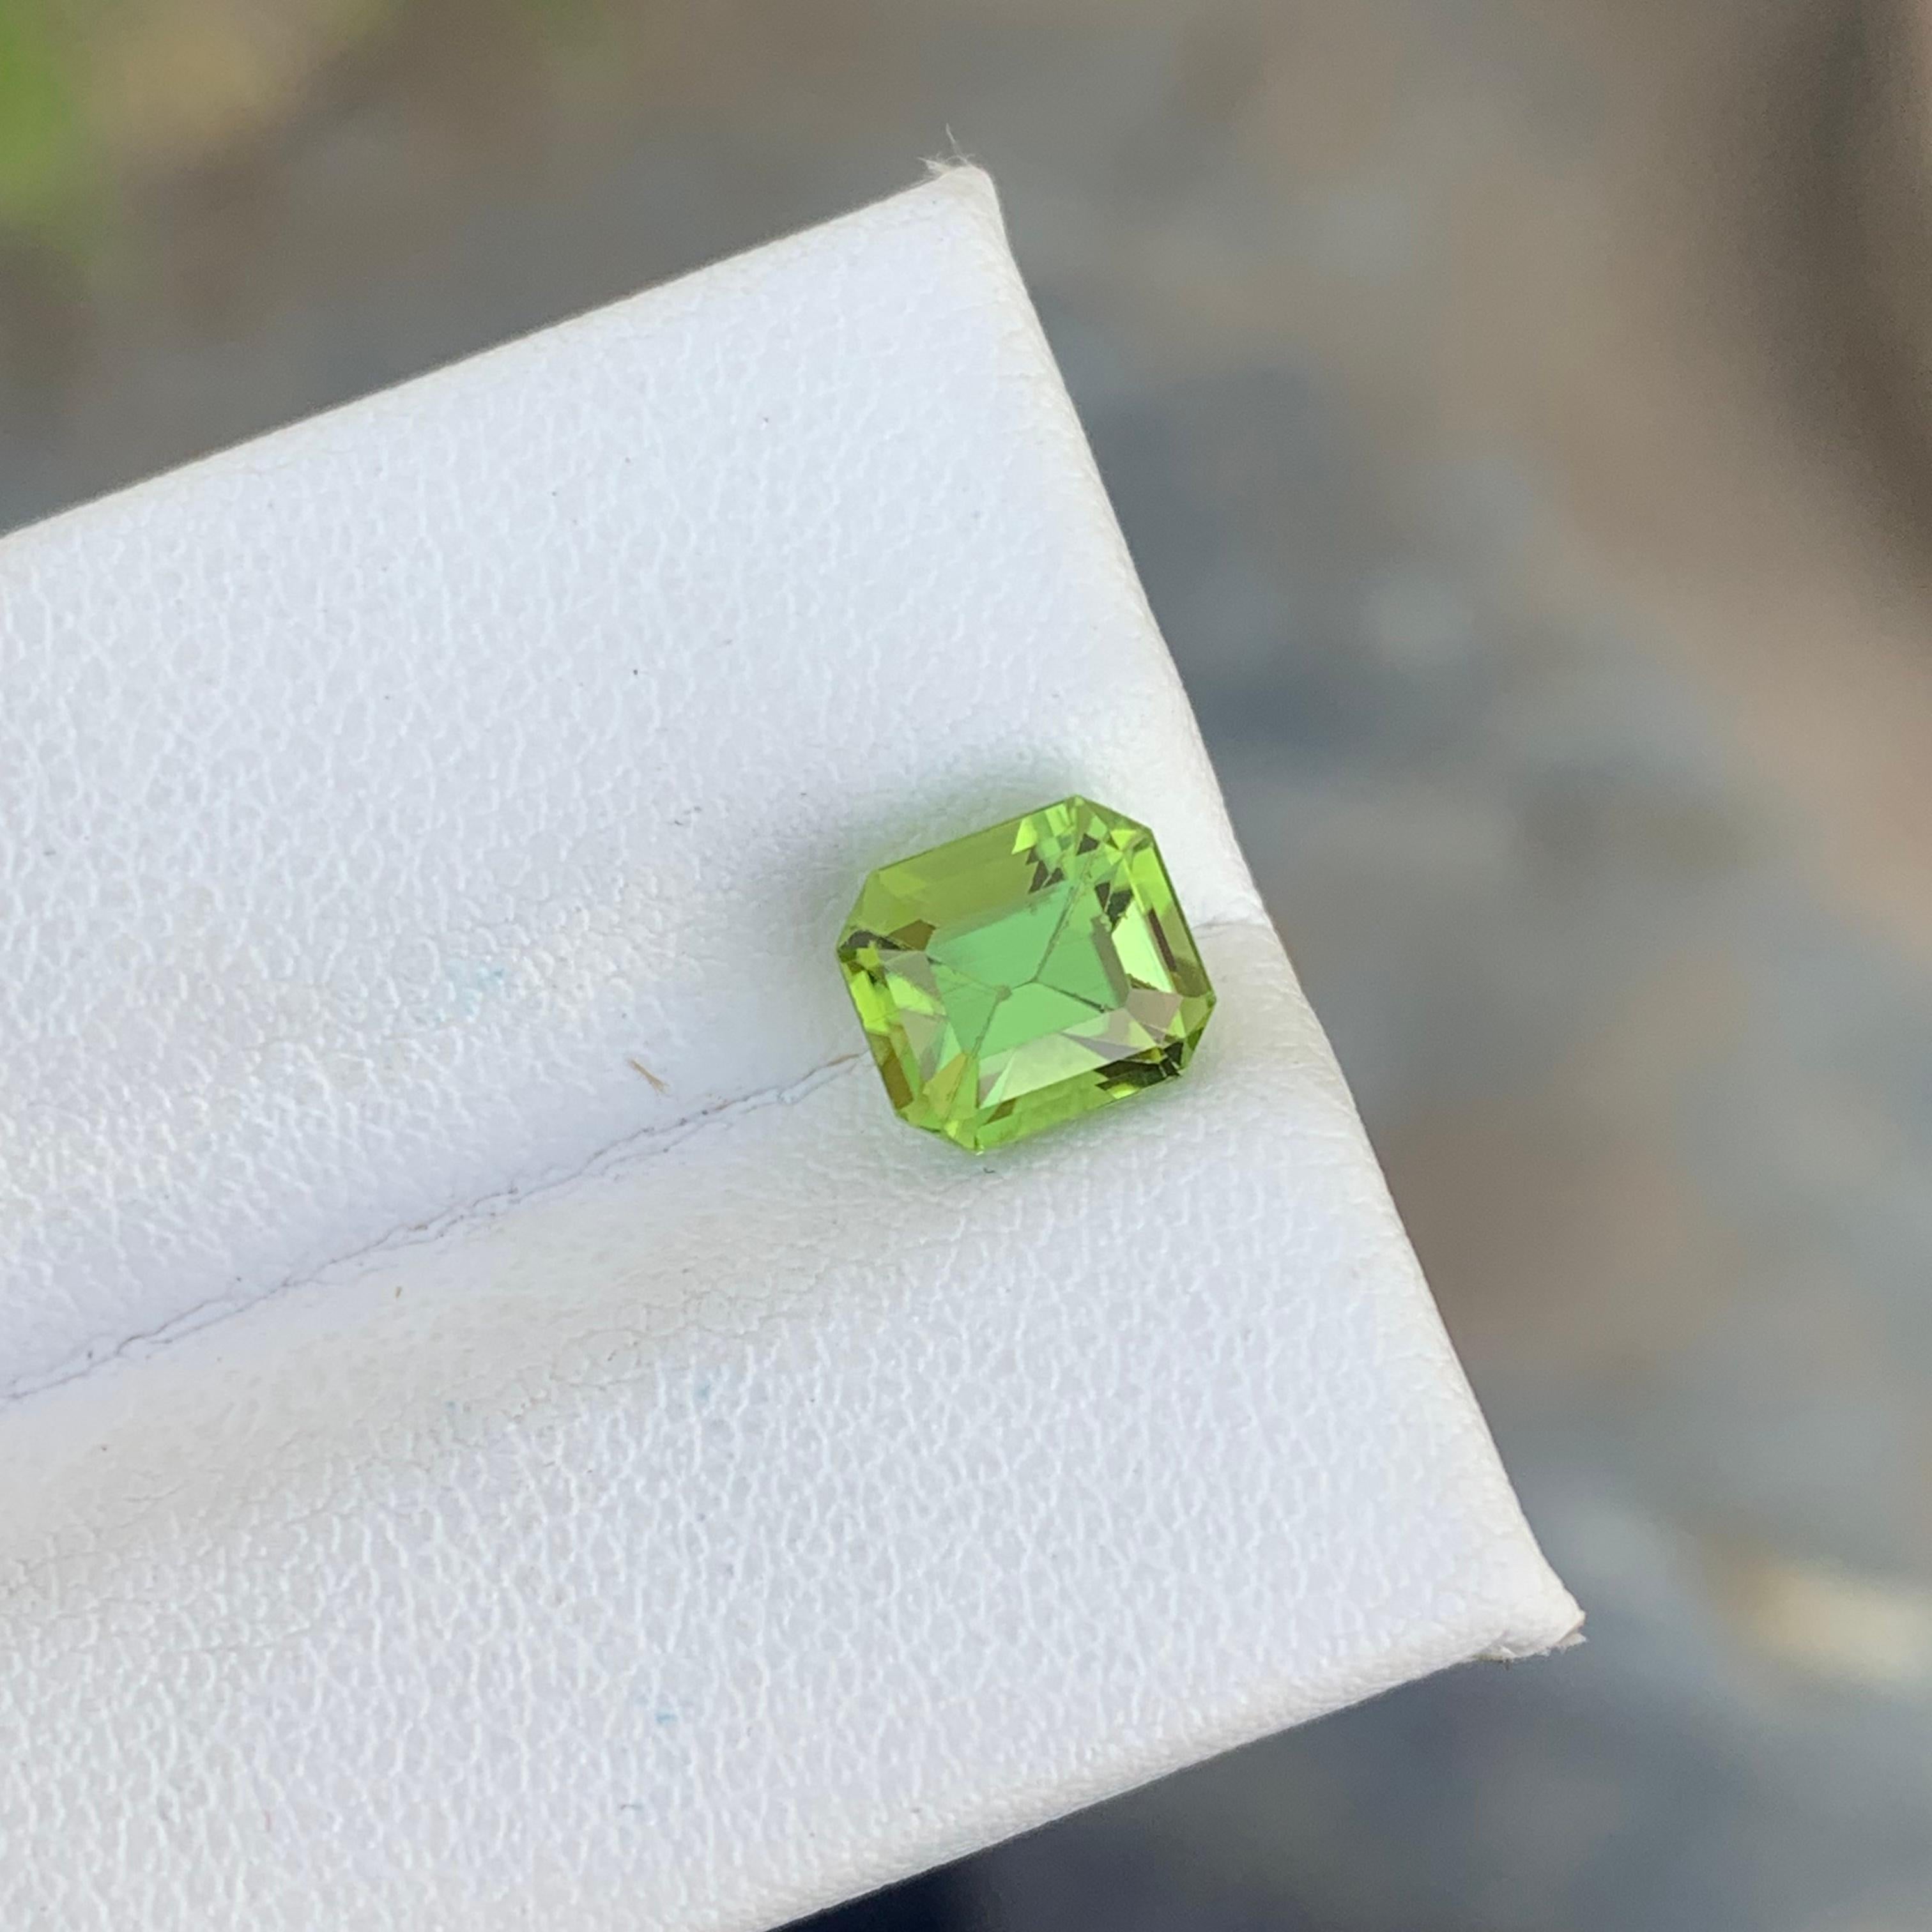 2.0 Carat Natural Loose Apple Green Peridot Gemstone For Ring Jewelry Making For Sale 1